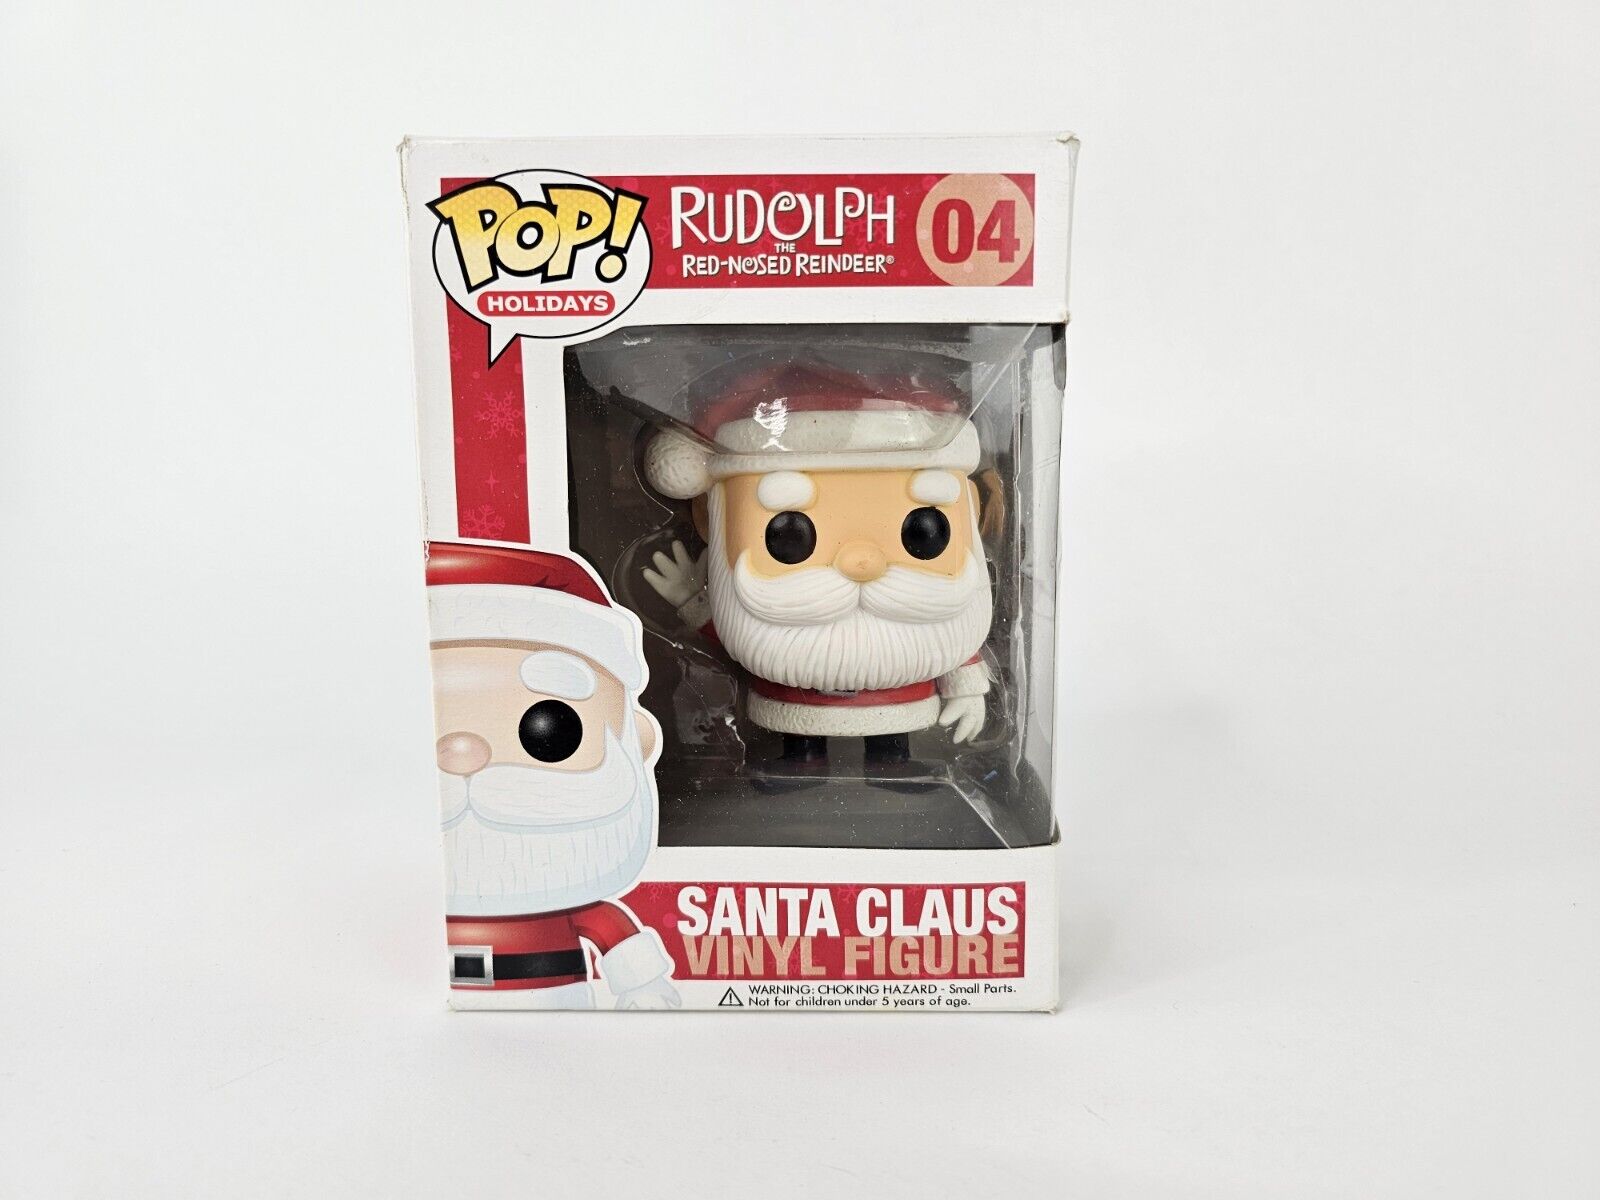 Funko POP Santa Claus #04 Rudolph The Red-Nosed Reindeer 